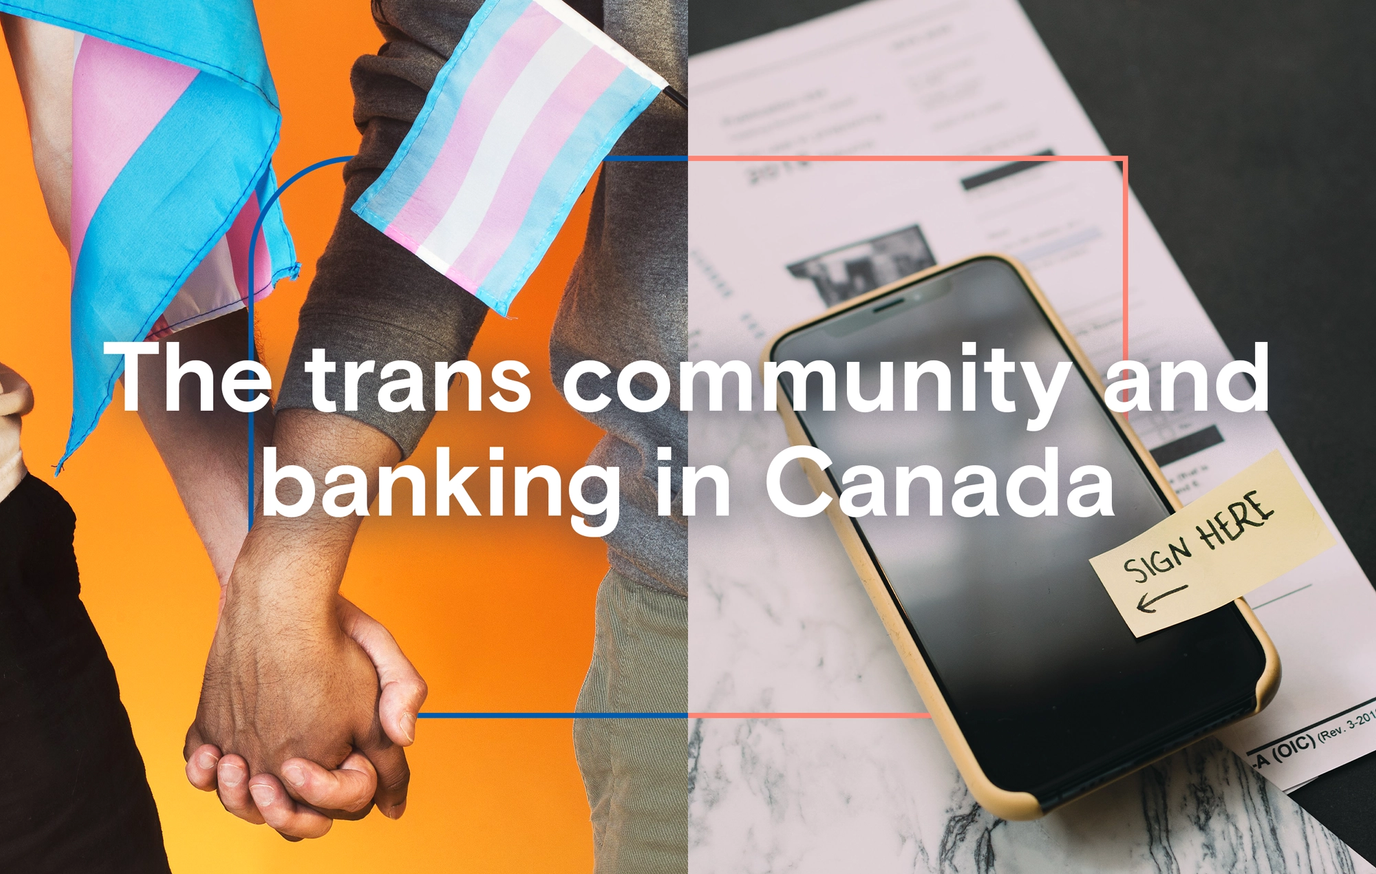 The trans community and banking in Canada